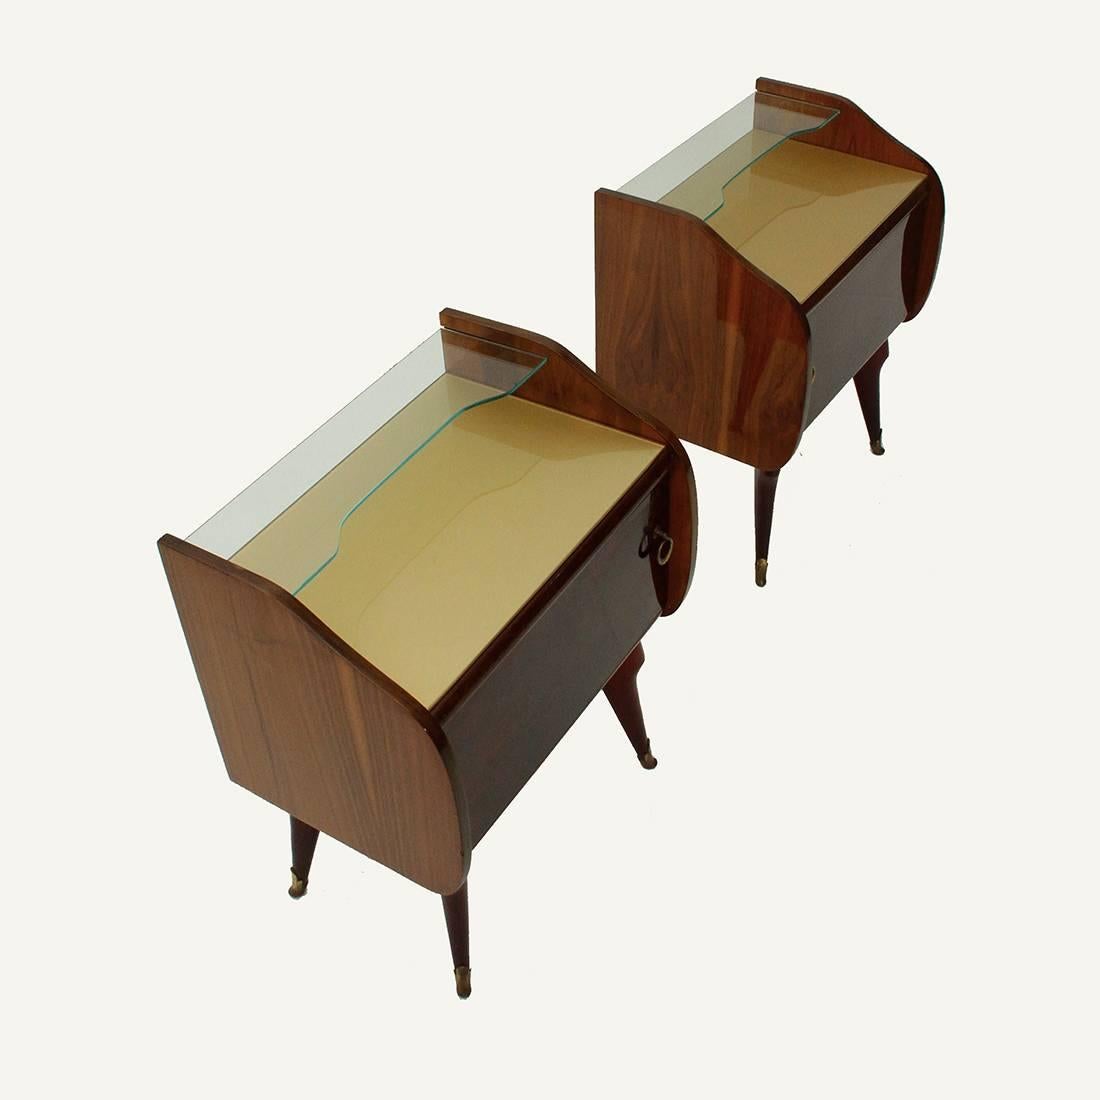 Pair of bedside tables of Italian production from the 1950s.
Wooden structure in veneered.
Compartment with brass handle.
Colored glass top, shaped glass top shelf.
Turned wooden legs with brass tips.
Good general conditions, some signs are